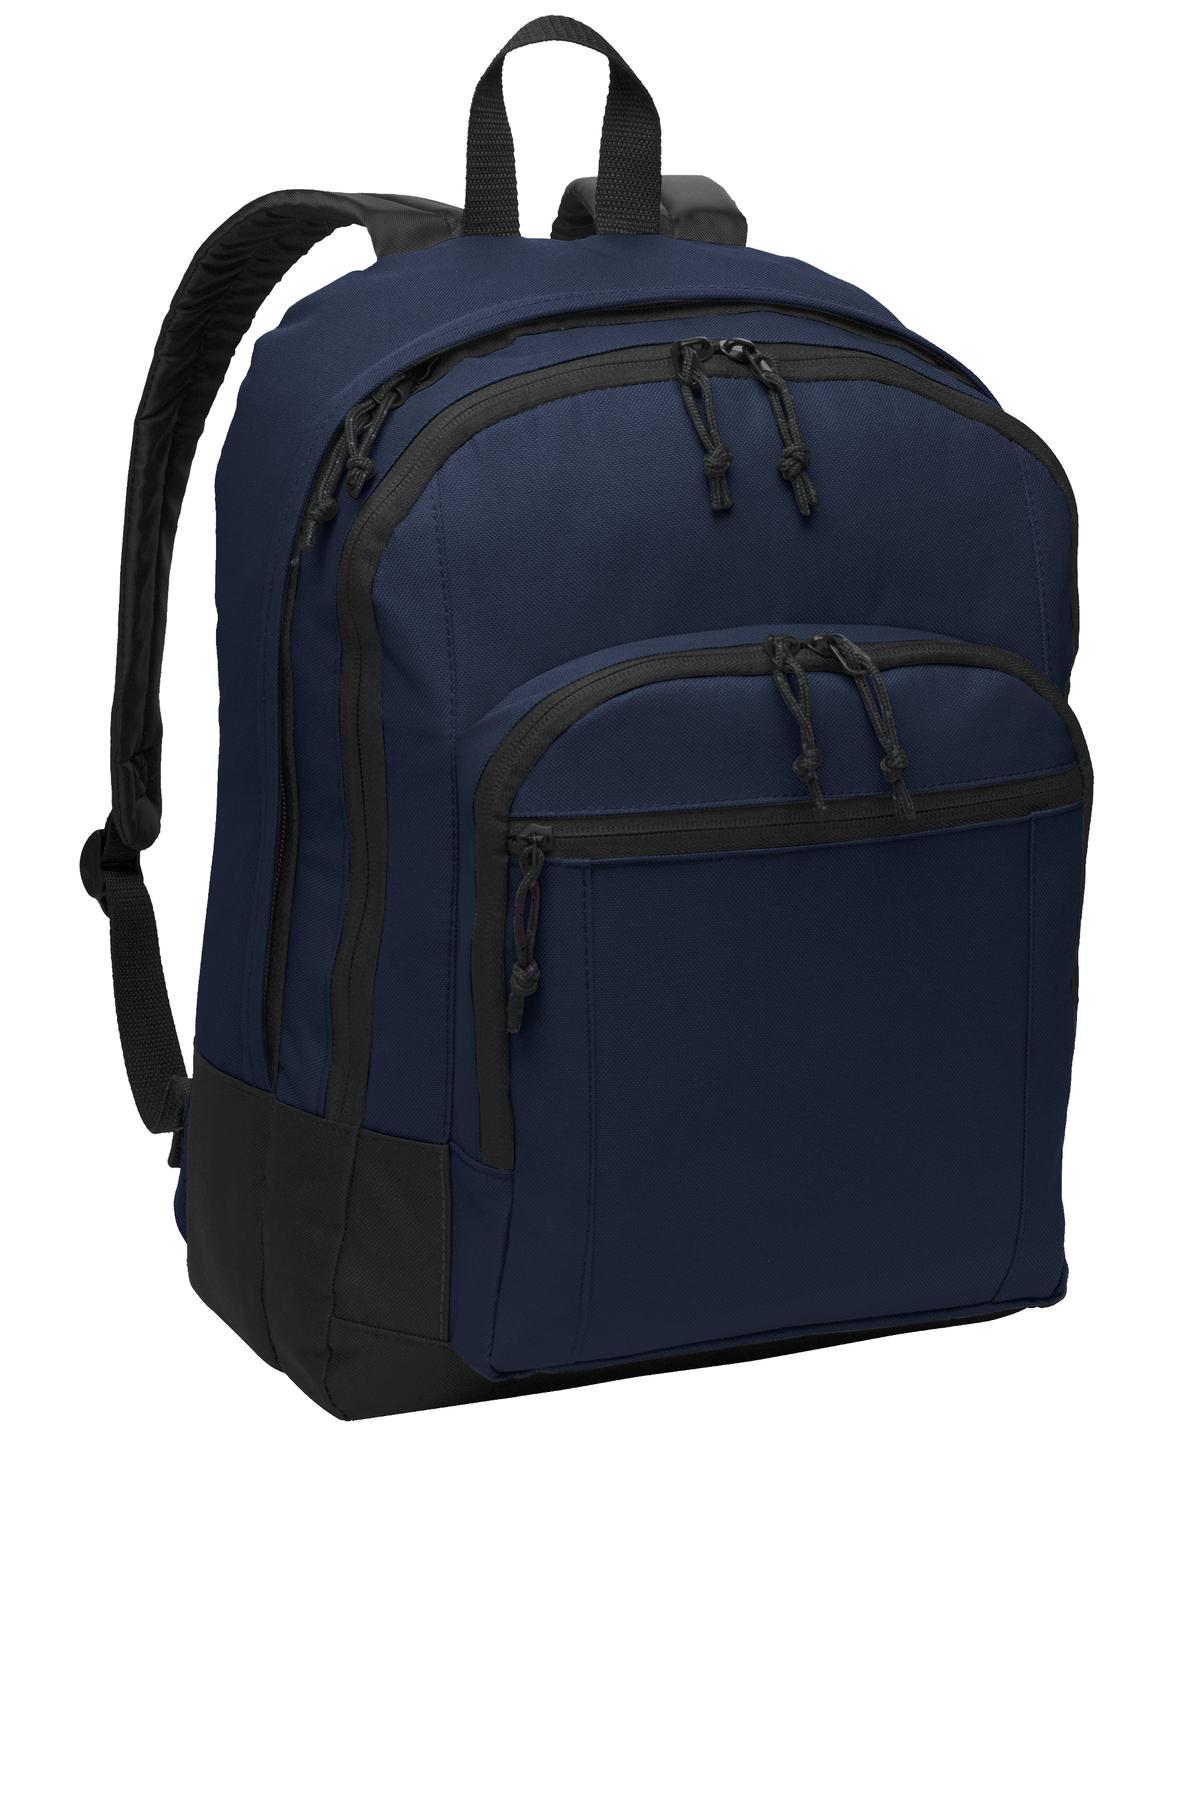 Photo of Port Authority Bags BG204  color  Navy